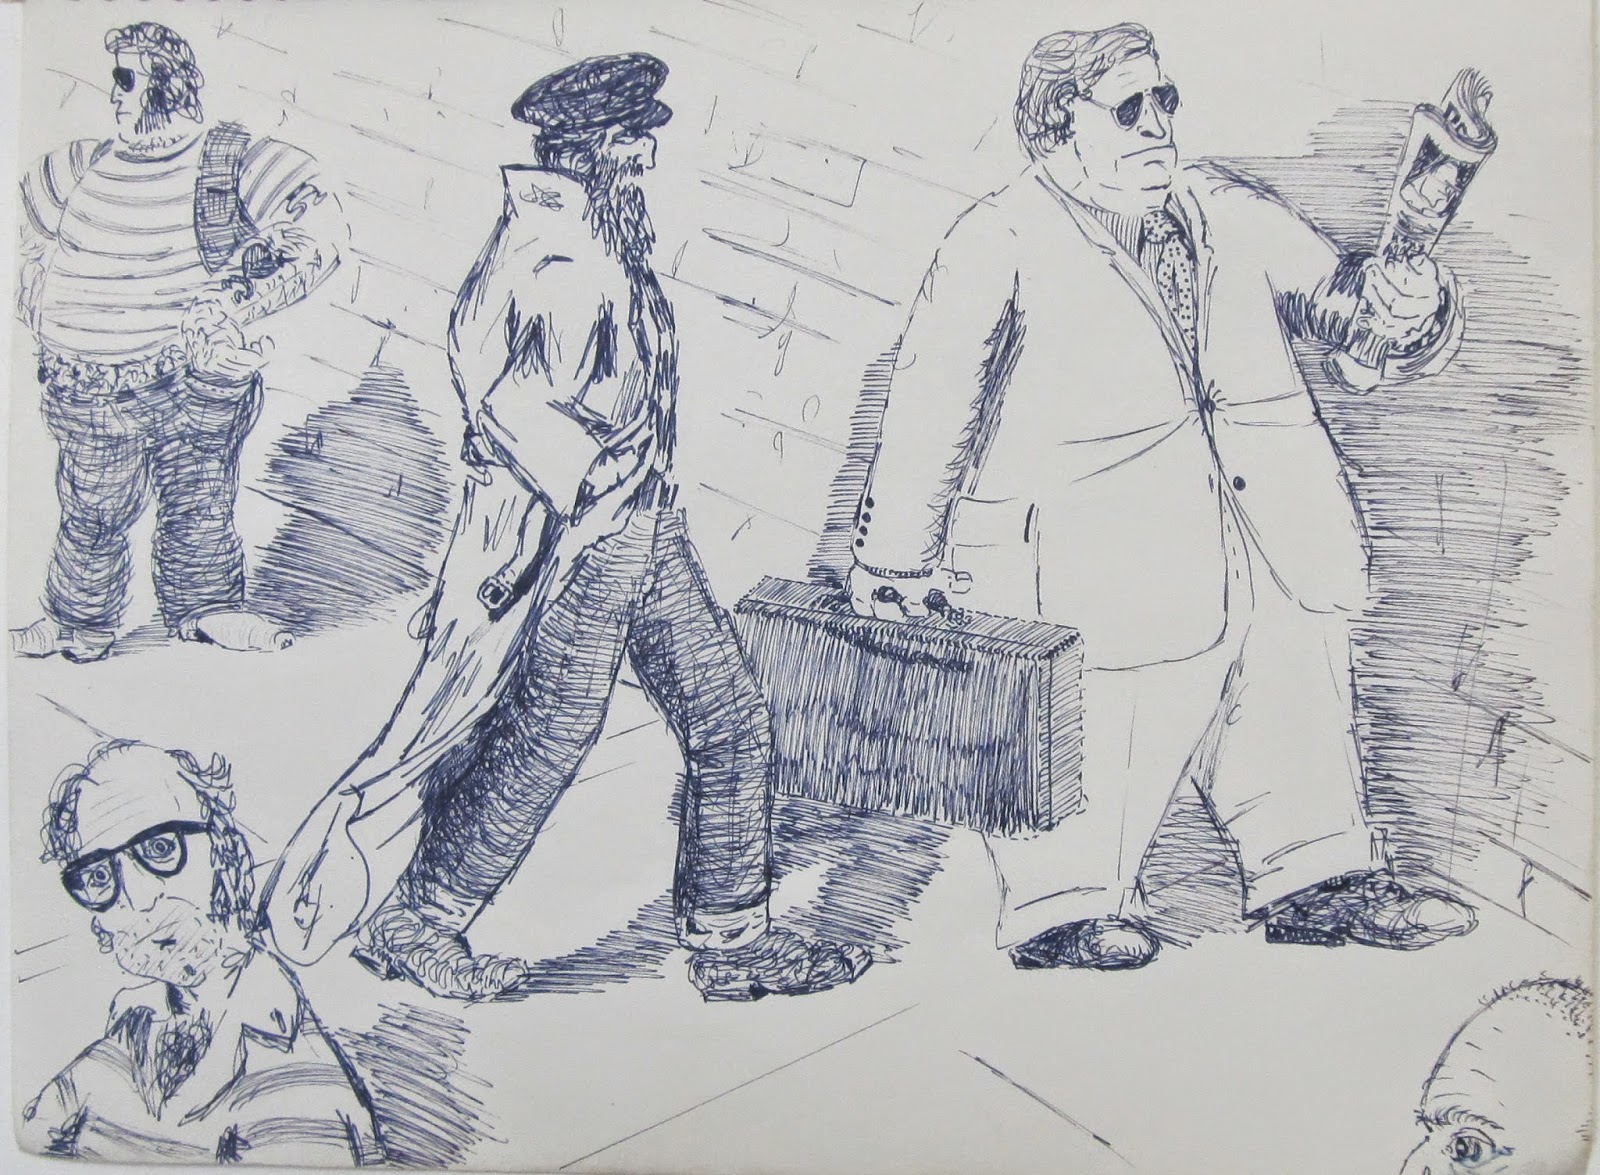 "Market People, Pike Place Market, Seattle." 8.5 x 11 inches. Pen and Ink. 1979